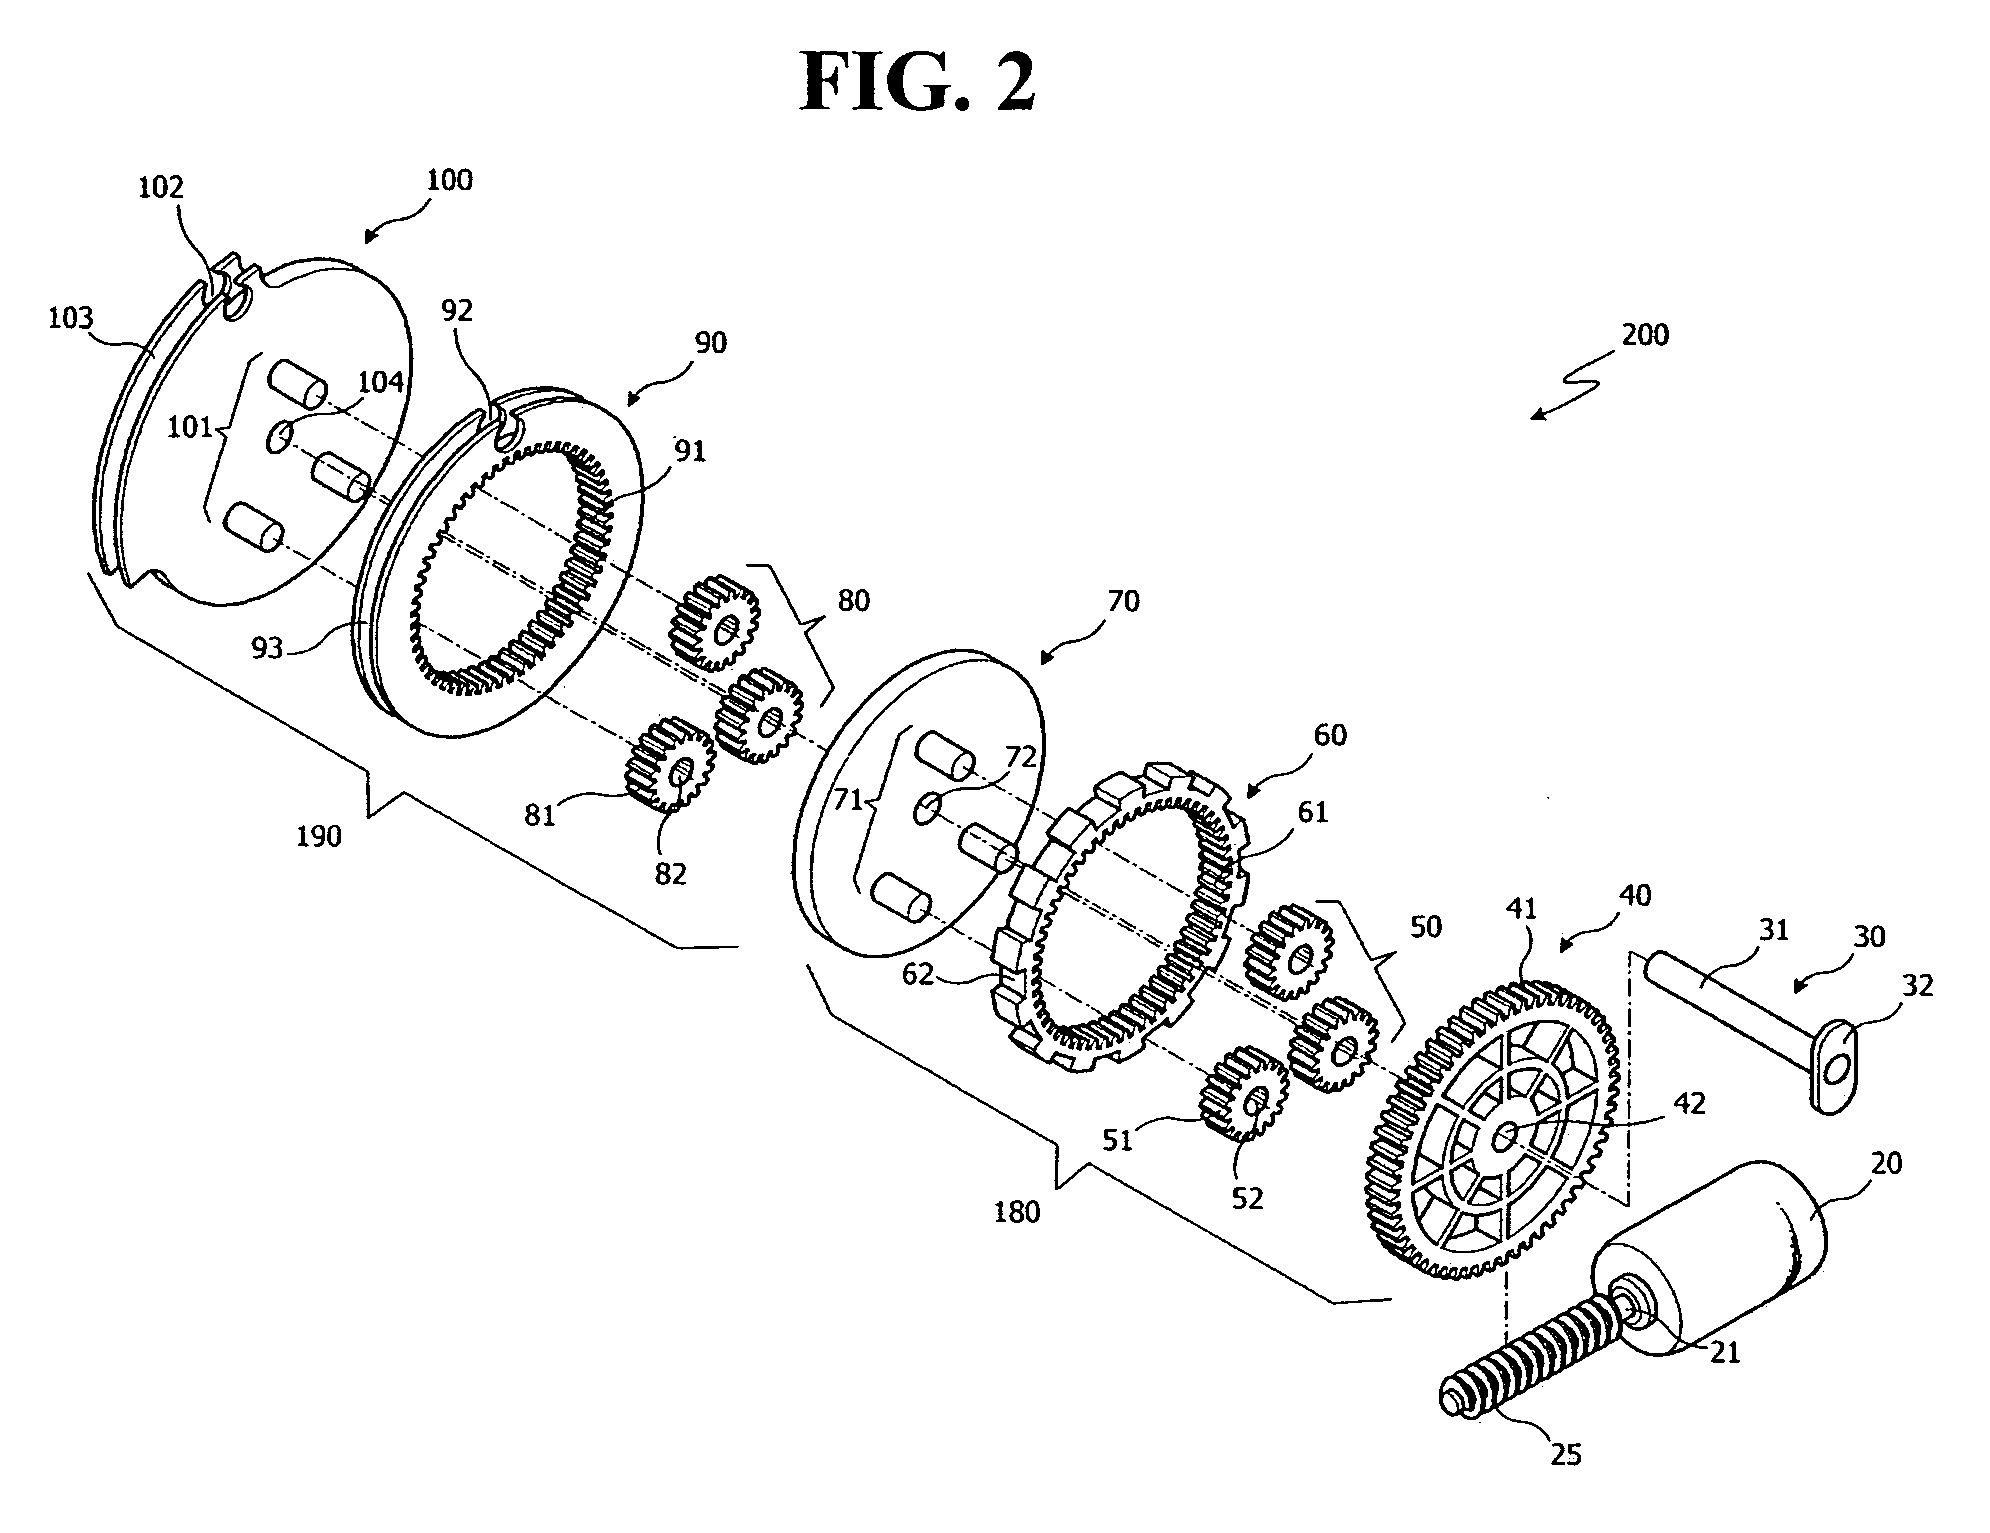 Cable-driving apparatus and parking brake system using planet gear assembly